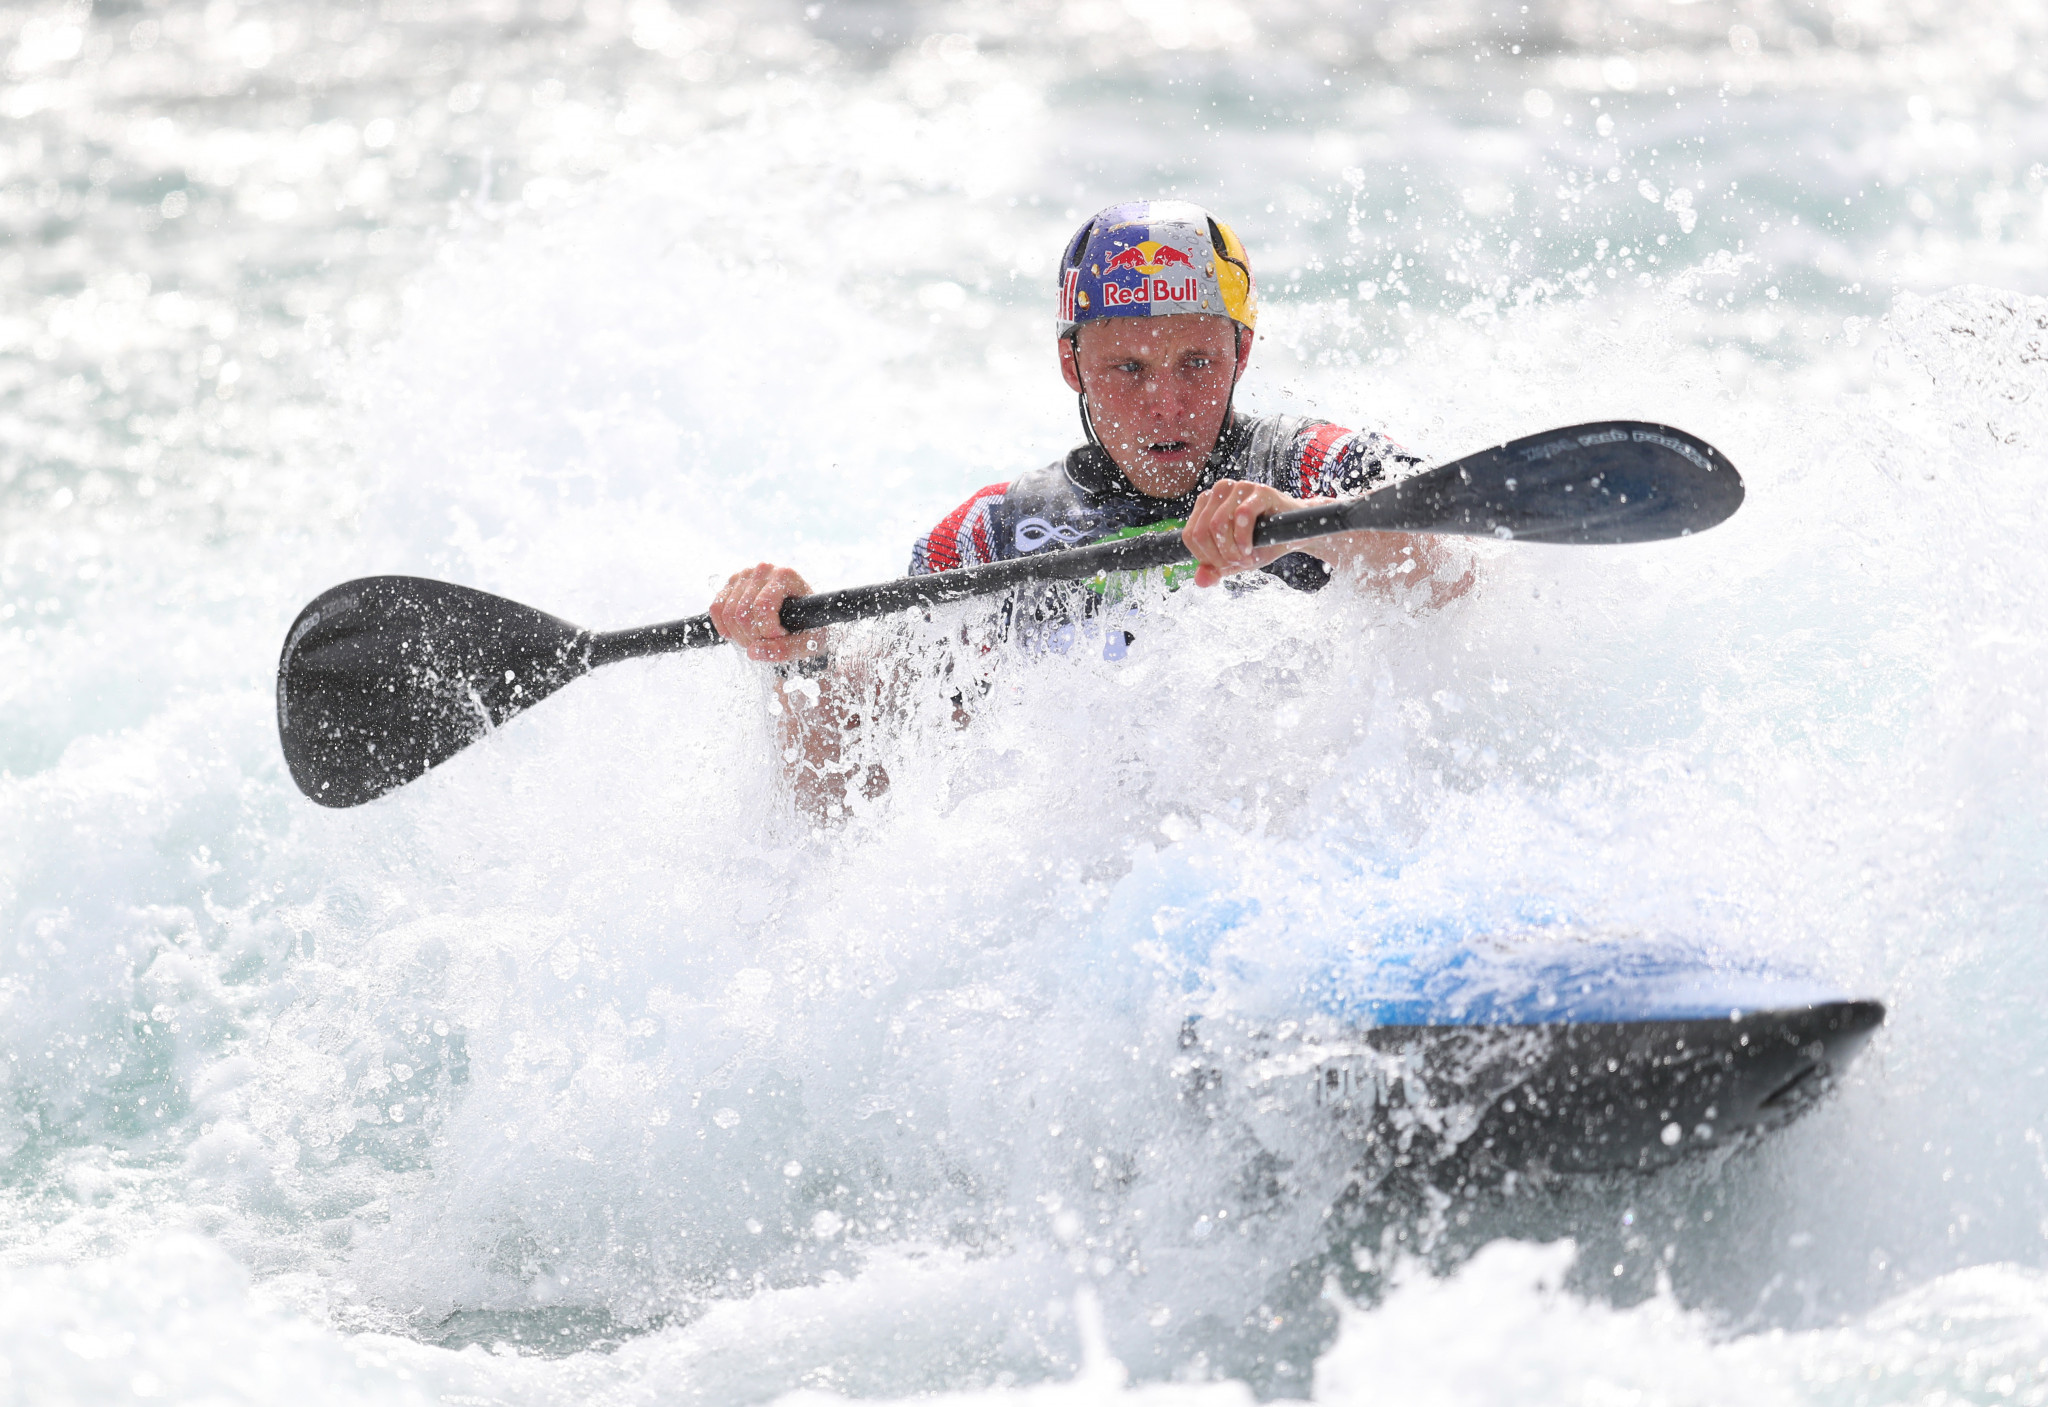 Joe Clarke, the K1 Olympic gold medallist in Brazil, will lead the charge for hosts Britain at the ICF Canoe Slalom World Cup in Lee Valley ©Getty Images